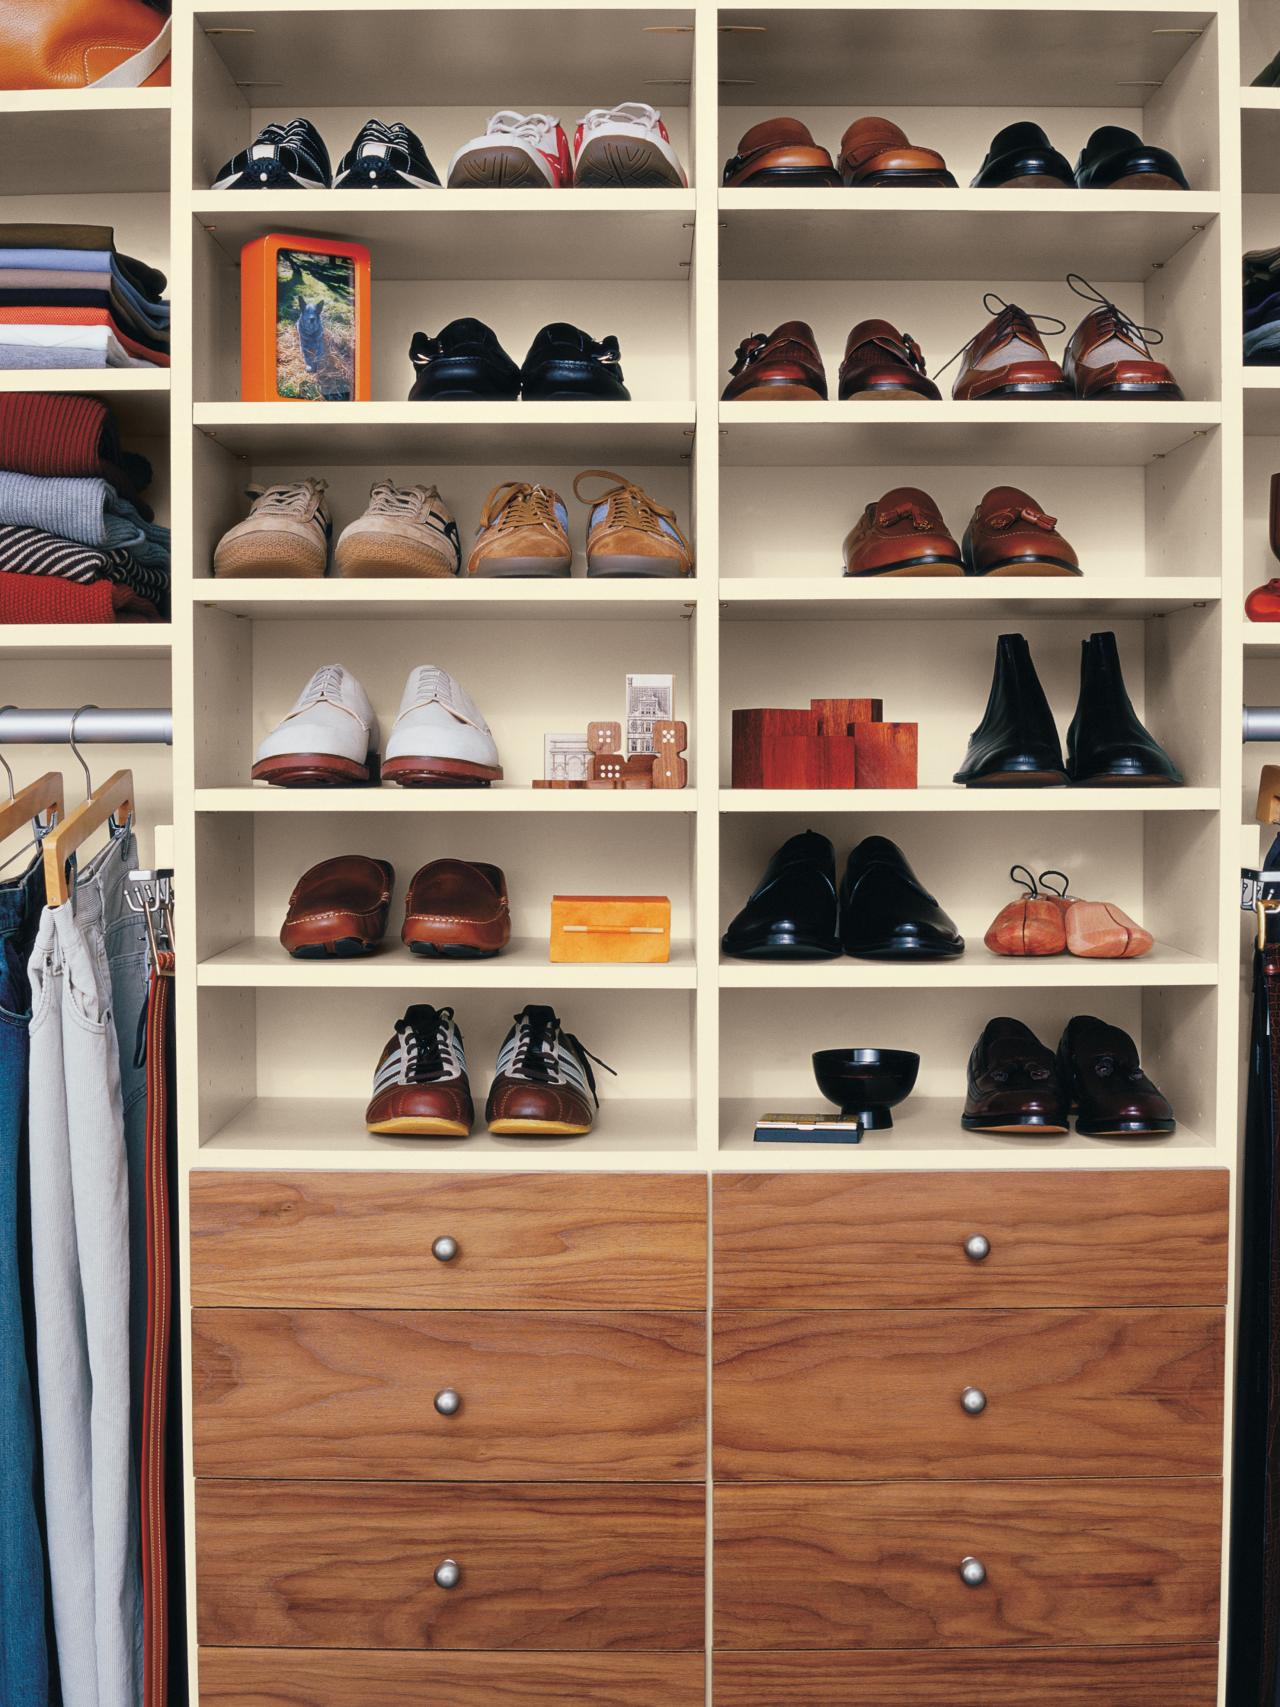 All About Drawers And Shelves, Closet With Drawers And Shelves